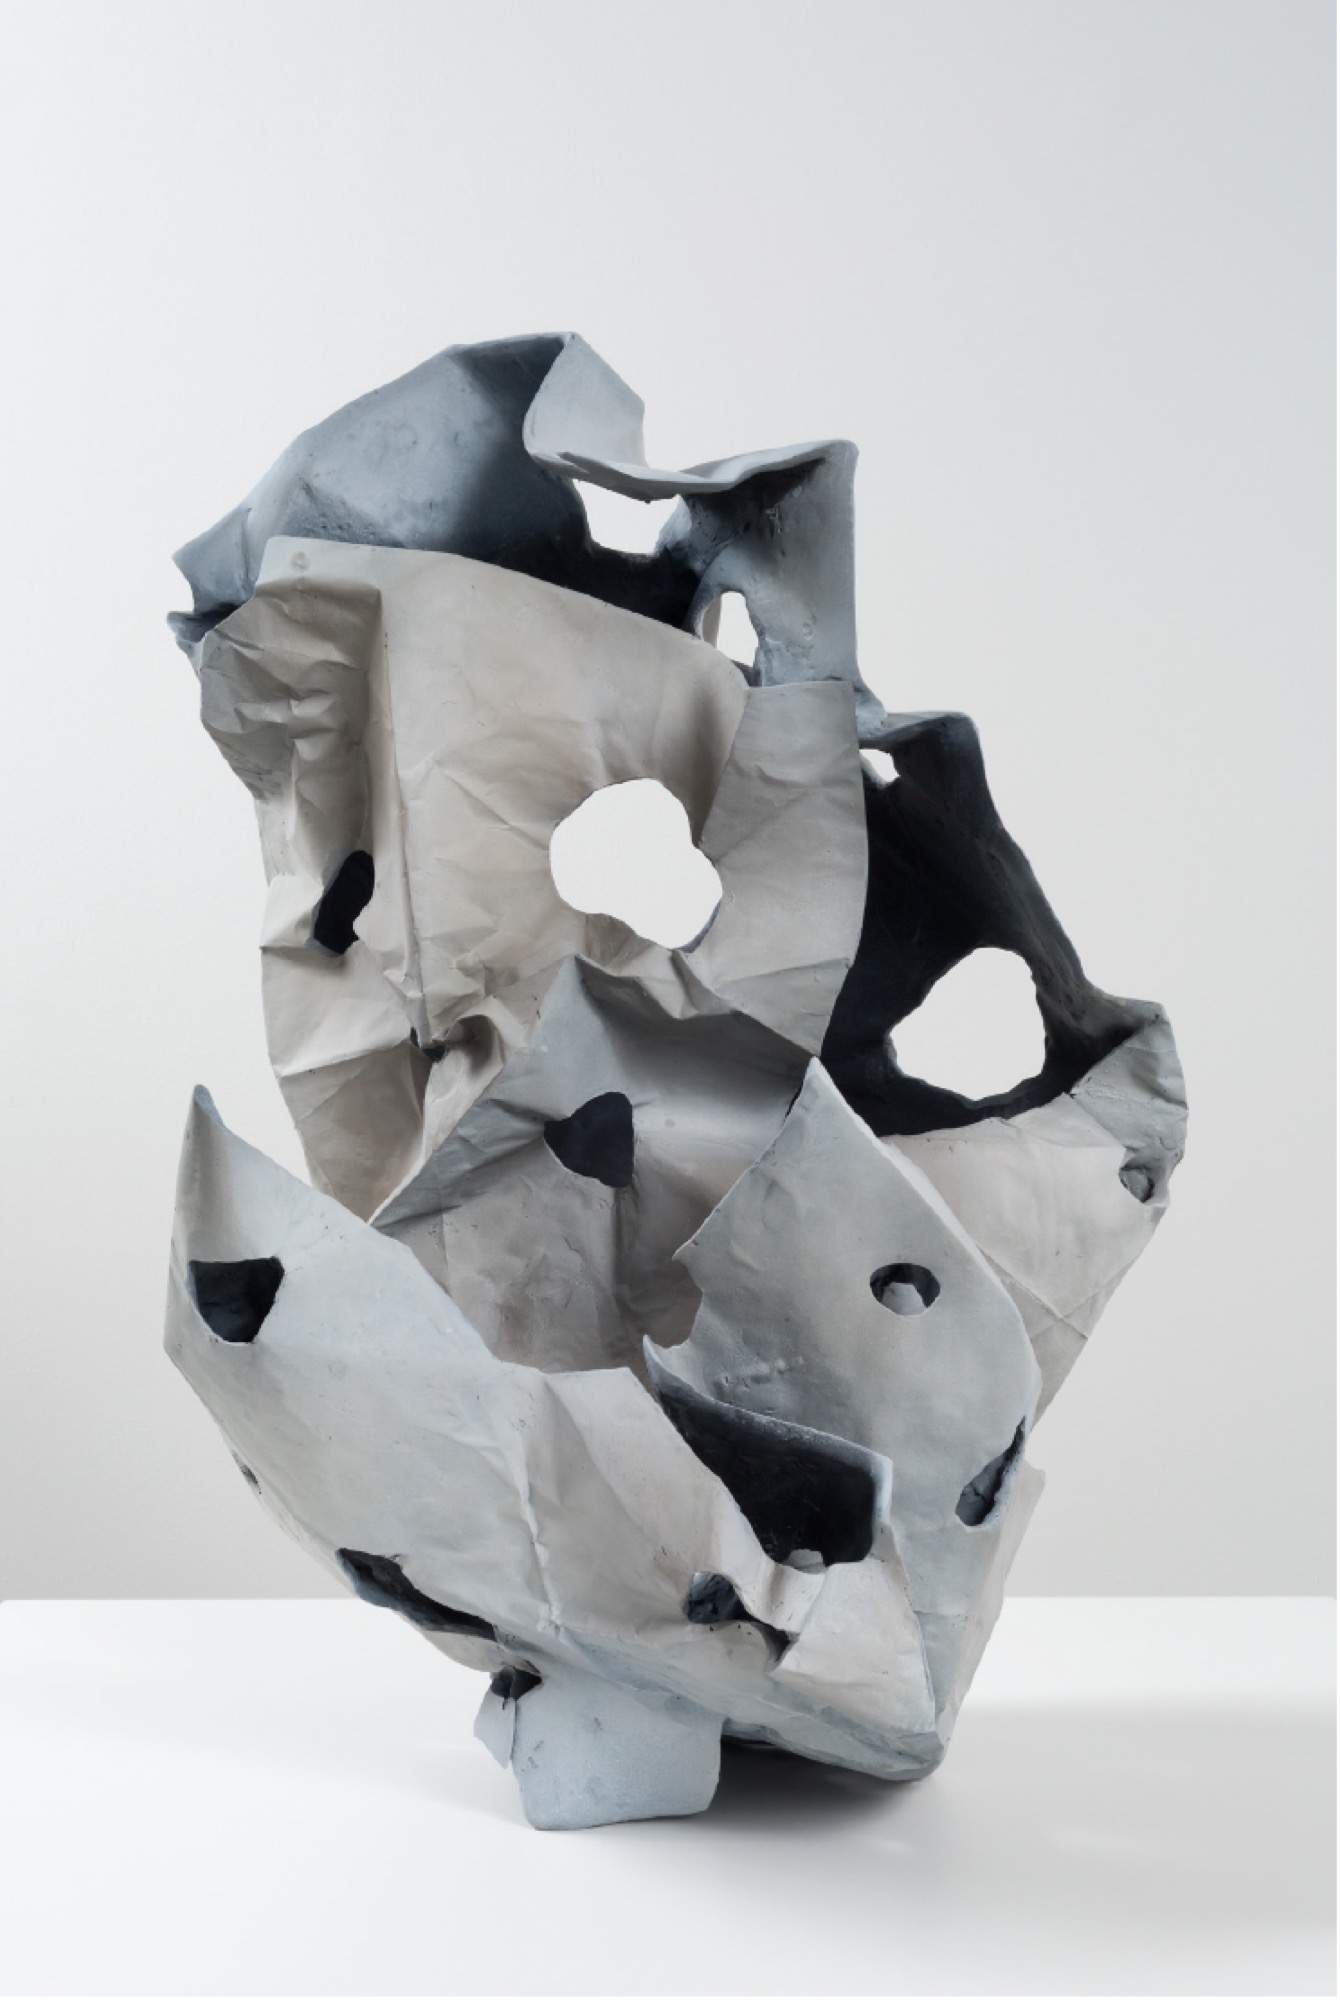 Anne-Marie May, <em>Scholar Stone #1</em>, 2017, patinated bronze from paper maquette, 67.0 x 48.0 x 38.0 cm, Courtesy McClelland Sculpture Park + Gallery. Photo: Christian Capurro